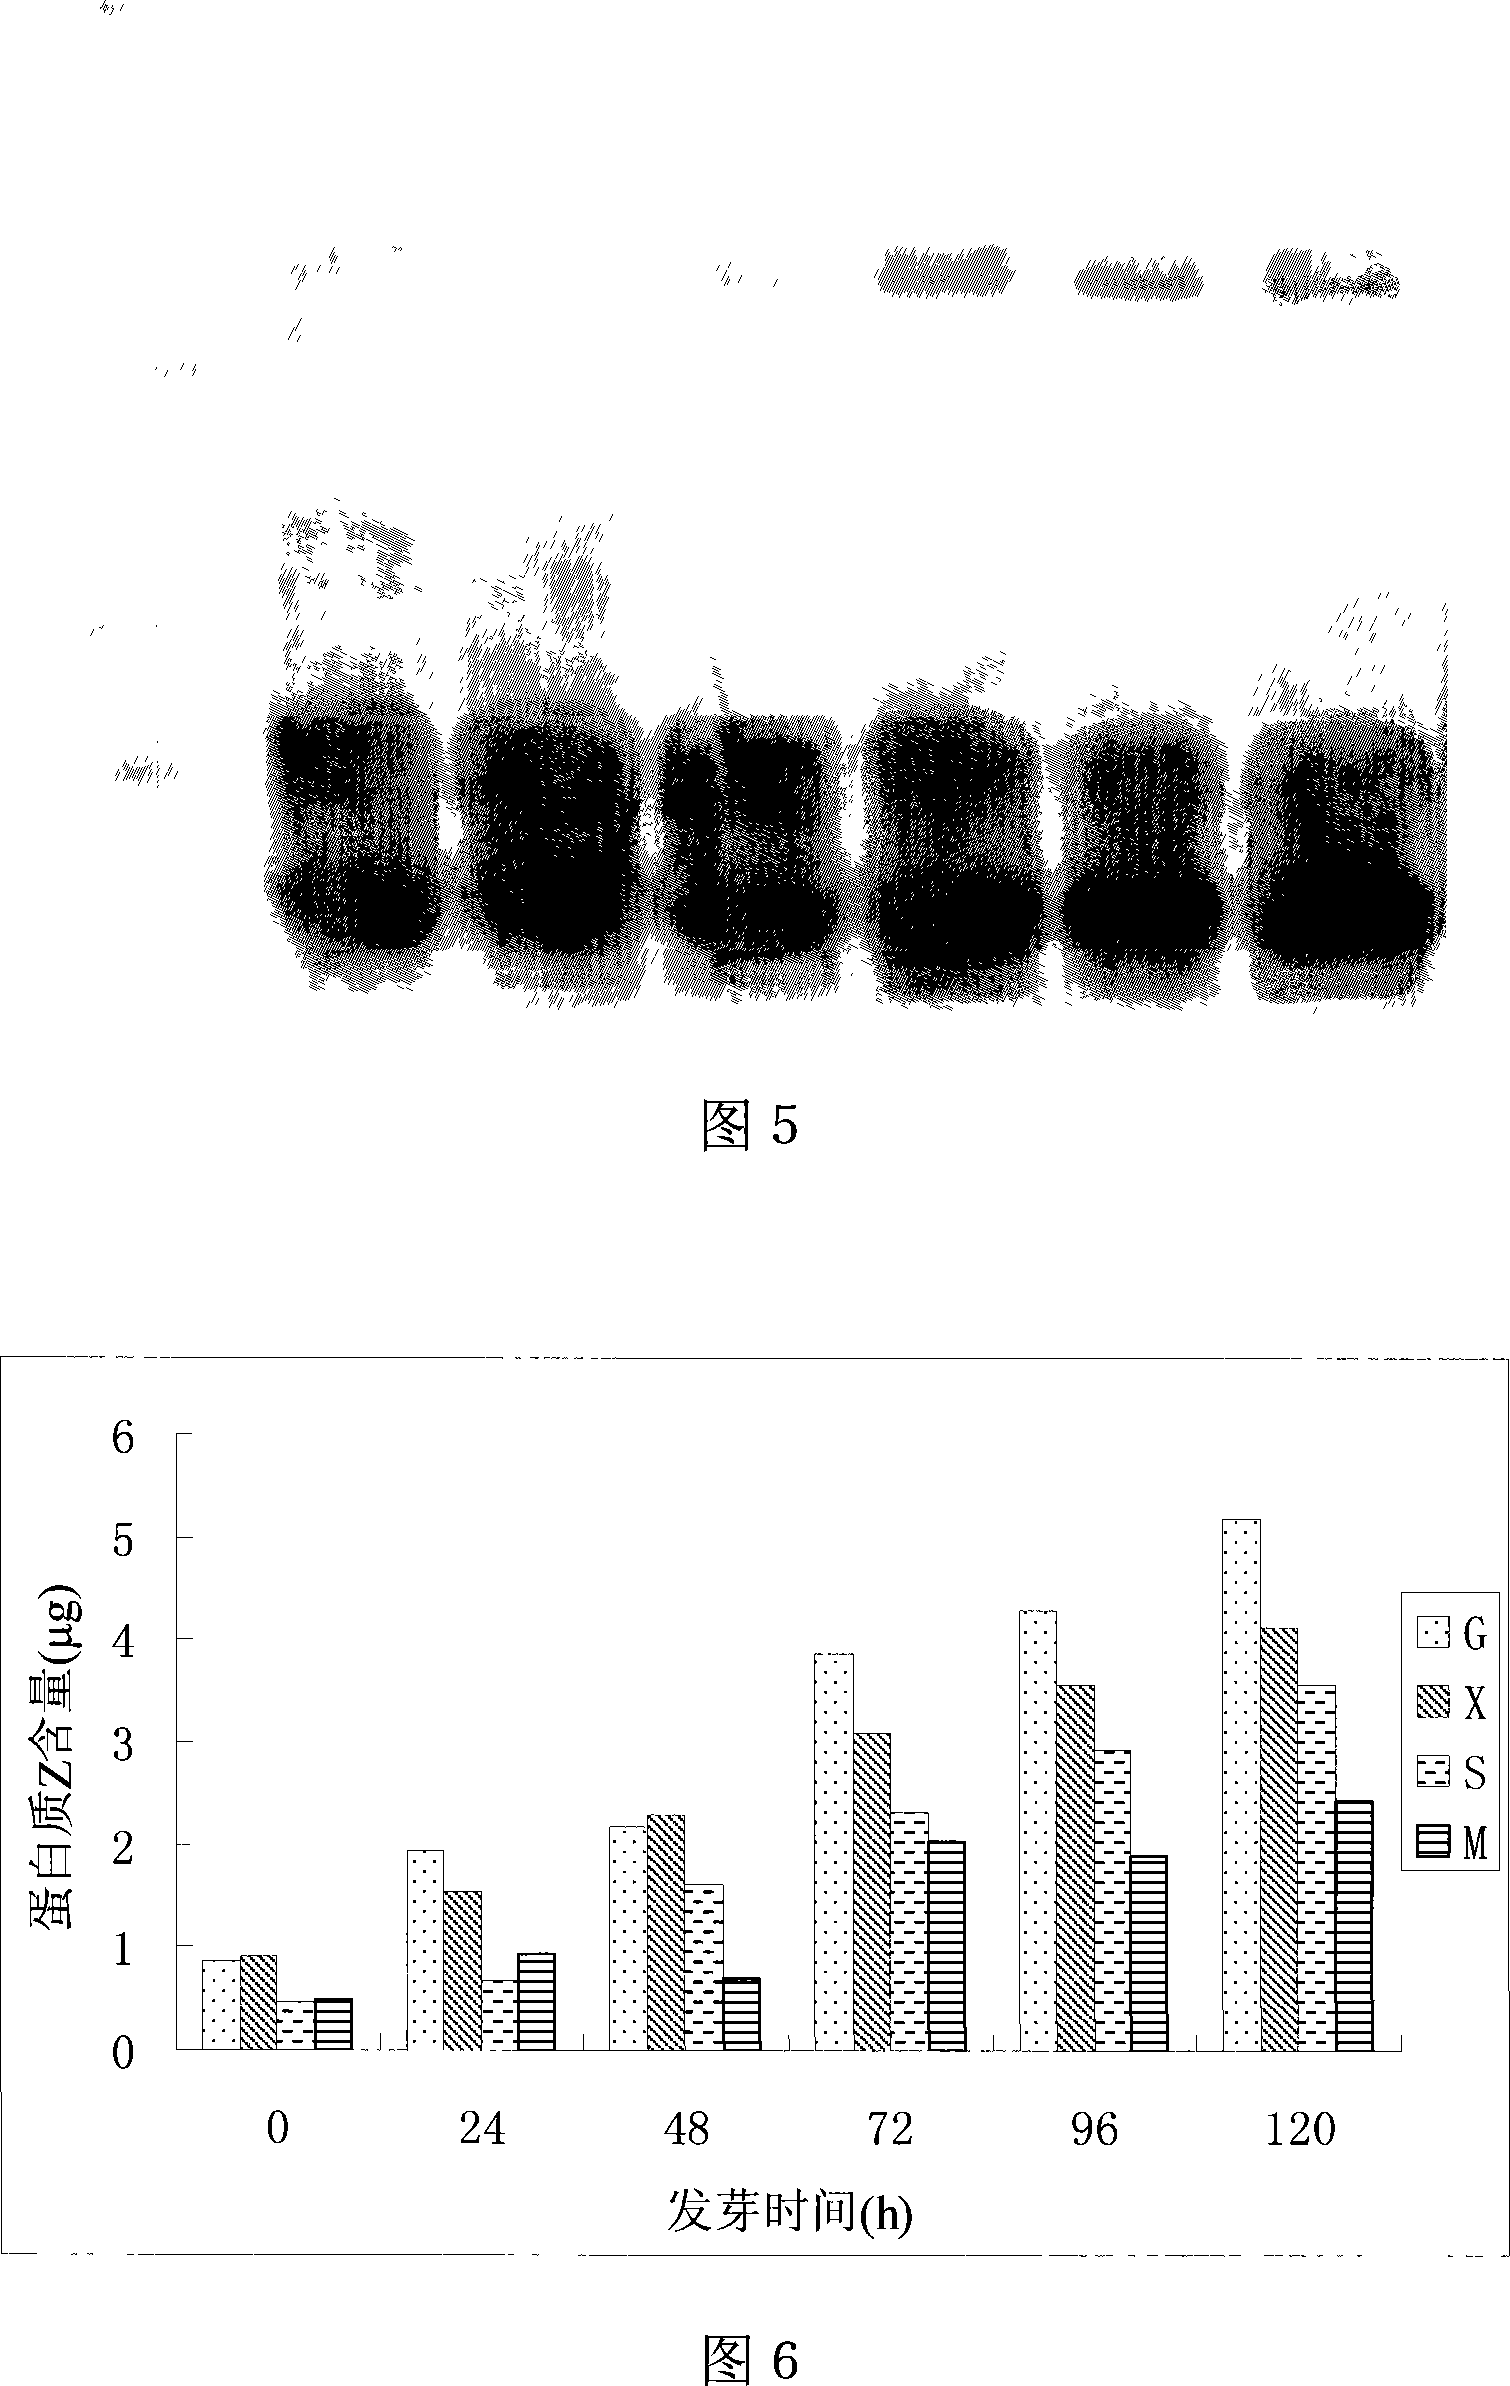 Method for detecting total foam protein component and content of beer barley and malt